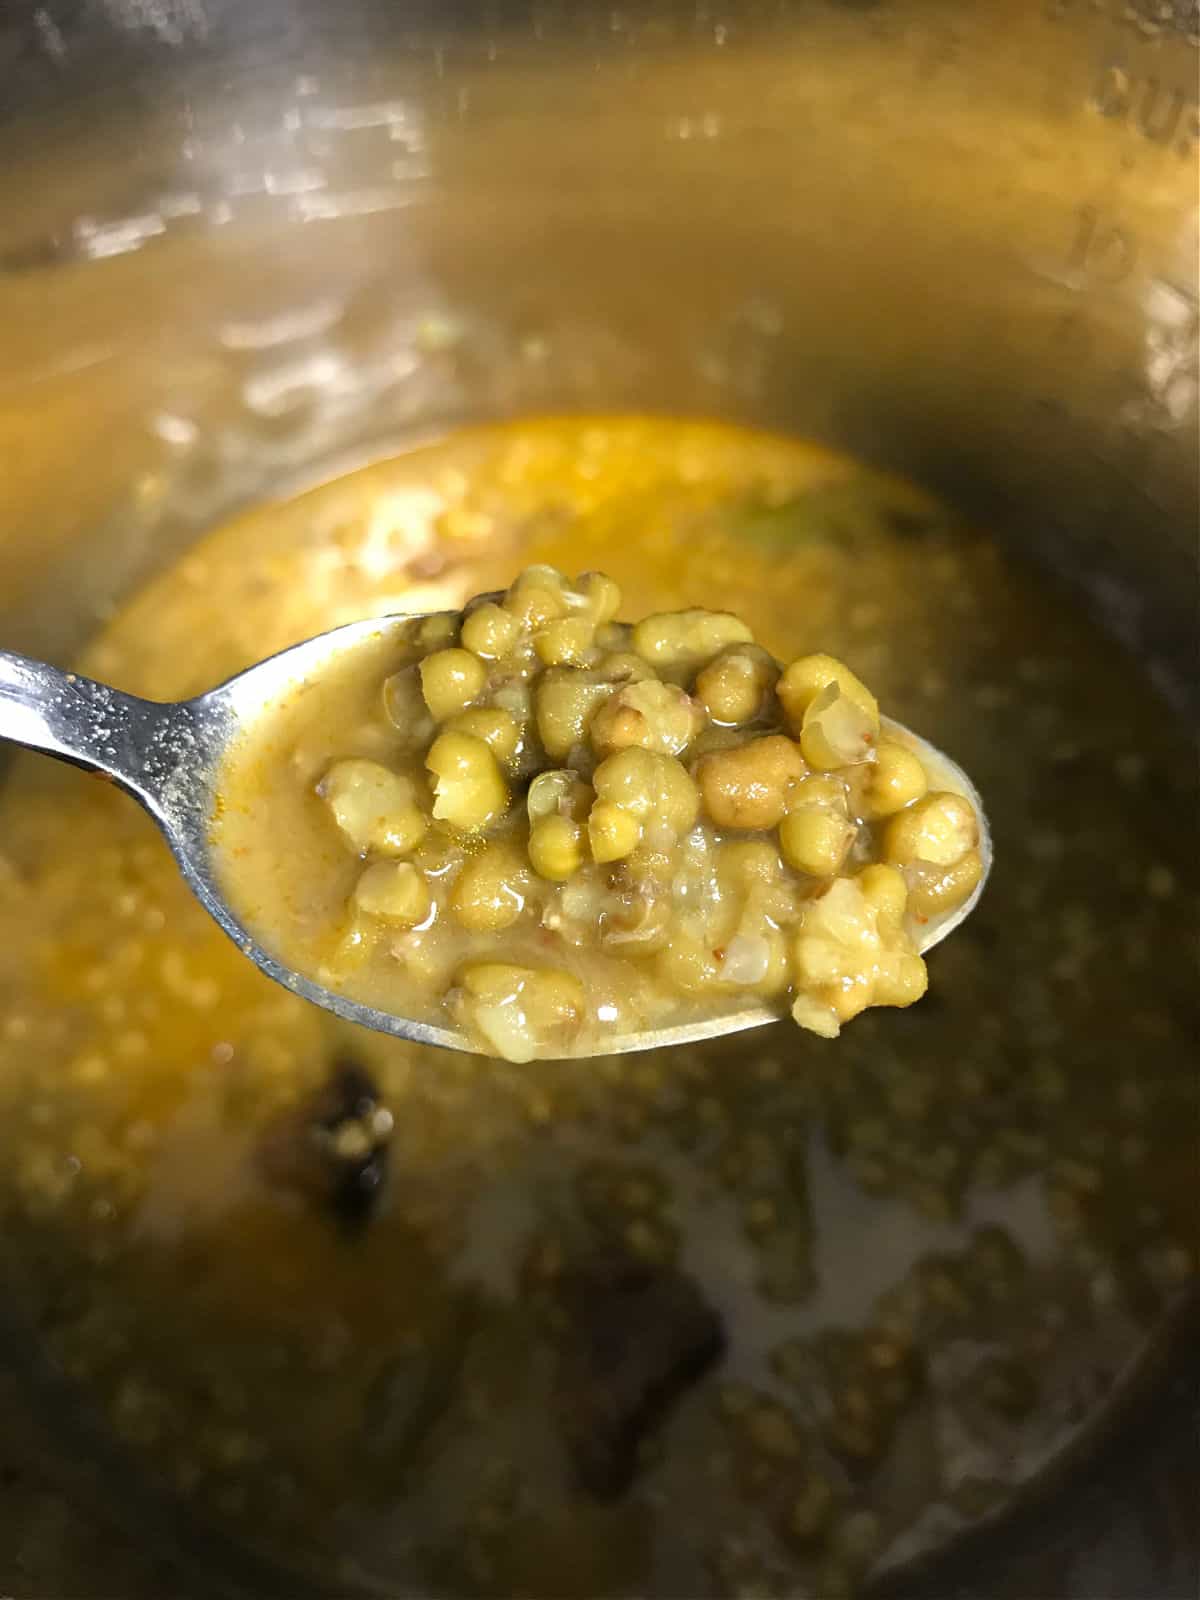 Spoonfull of mung beans cooked